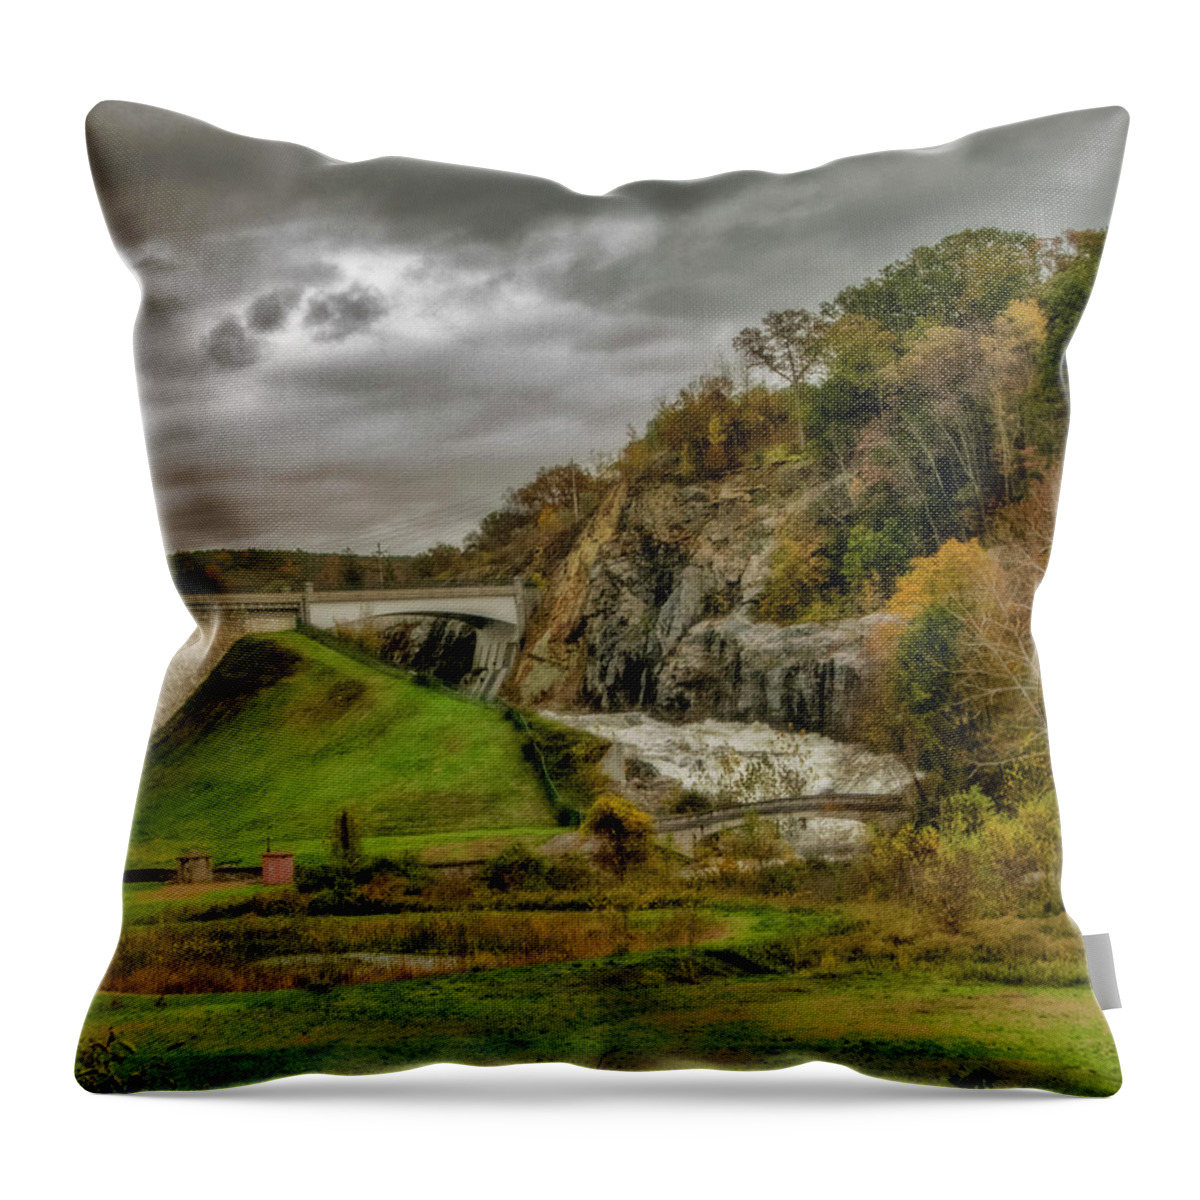 Water Throw Pillow featuring the photograph Spillway by Cathy Kovarik